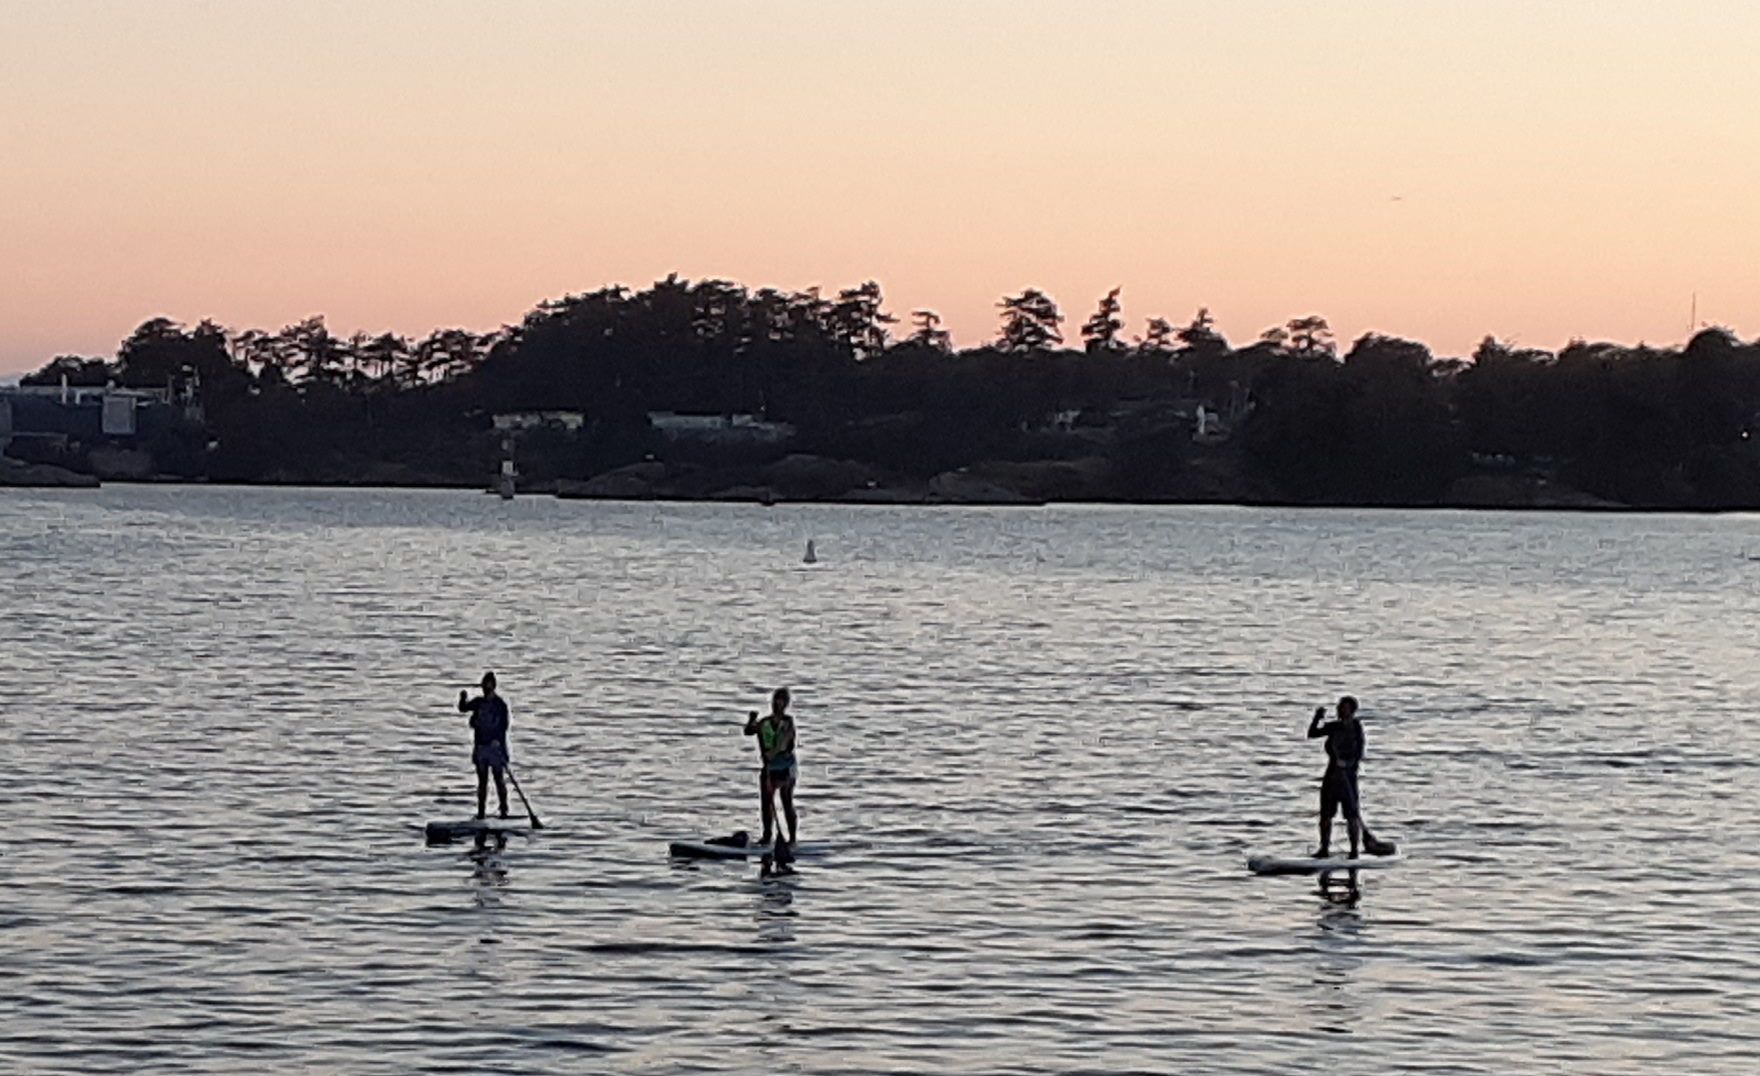 3 paddle boarders in the ocean during the sunset